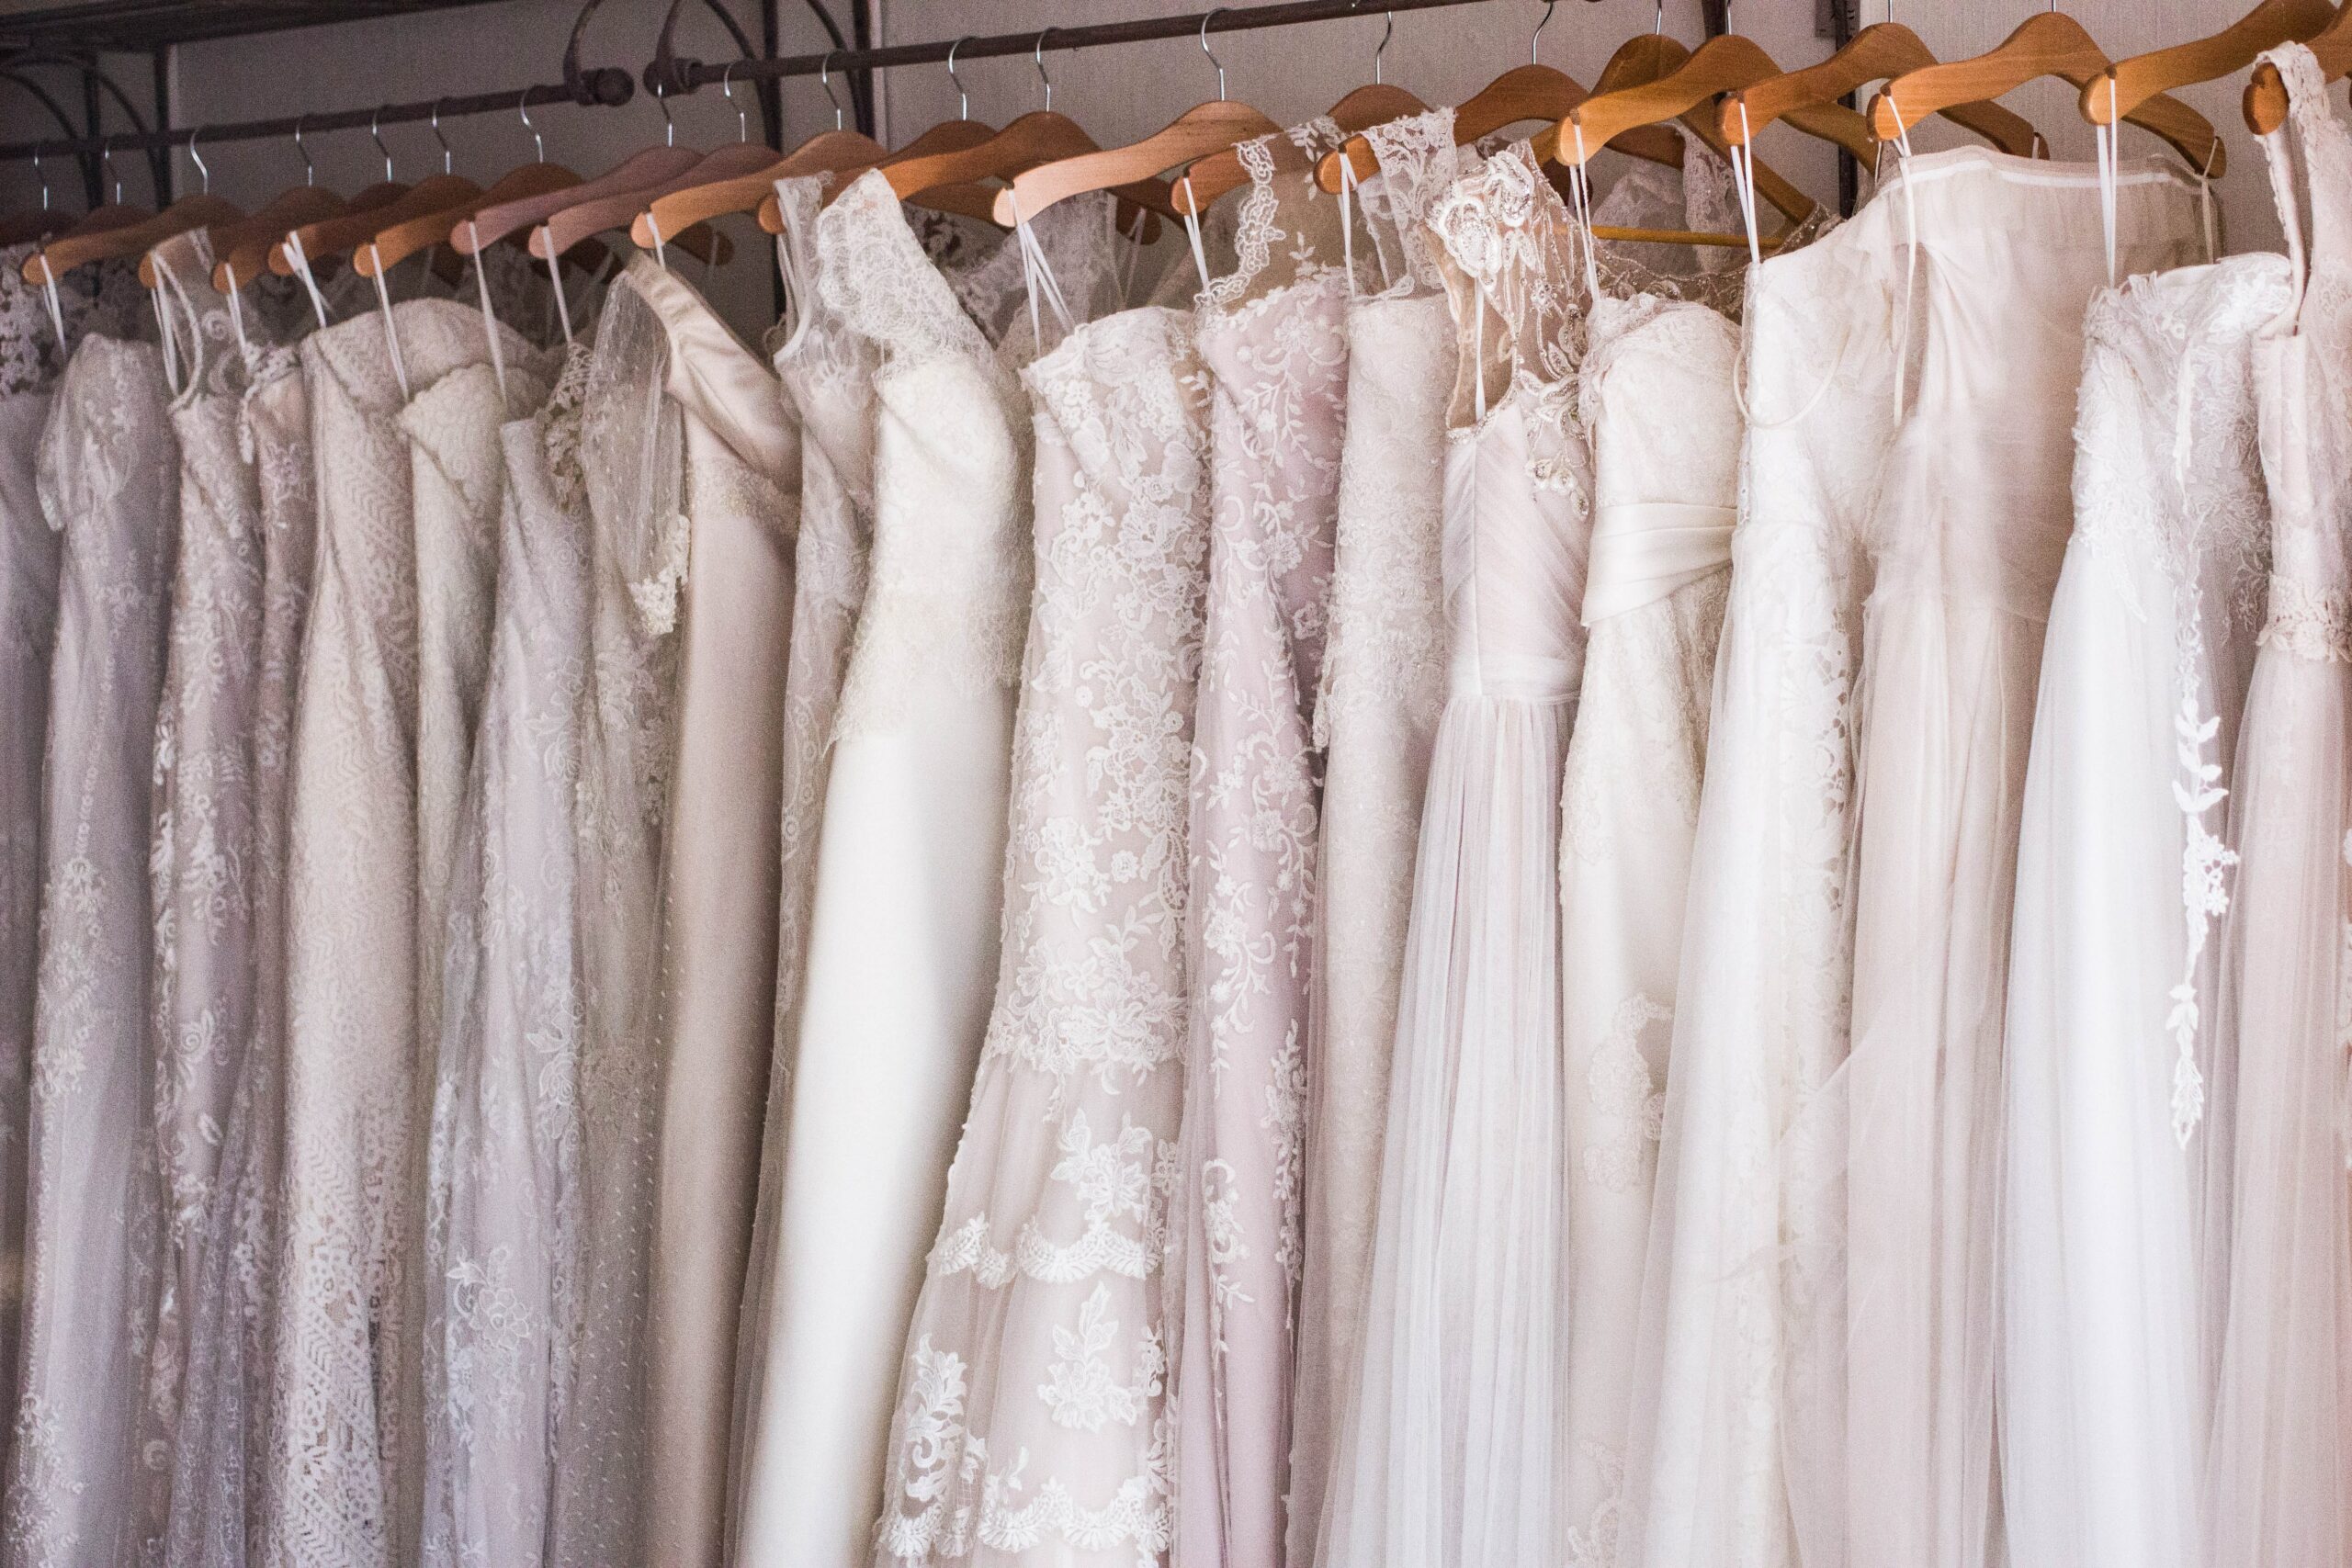 Ask Your Wedding Dress Dry Cleaner Before Hiring Them